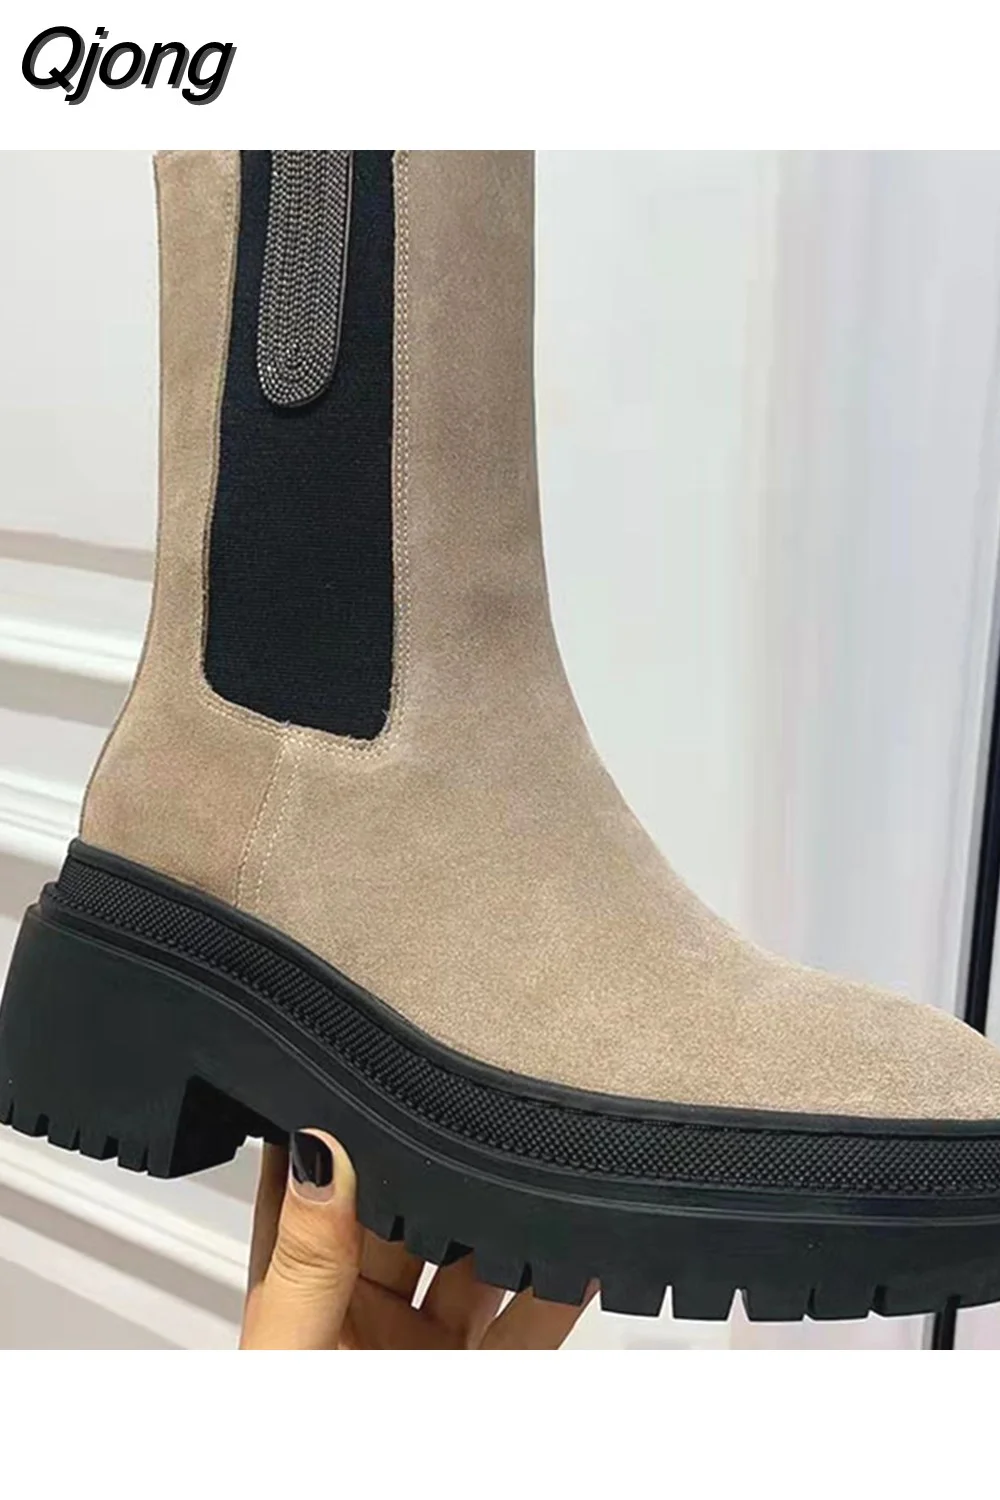 Qjong Thick Sole Square Heel Short Boots Women Suede Leather Chelsea Boots Woman Chain Decor Motorcycle Boots Women Shoes